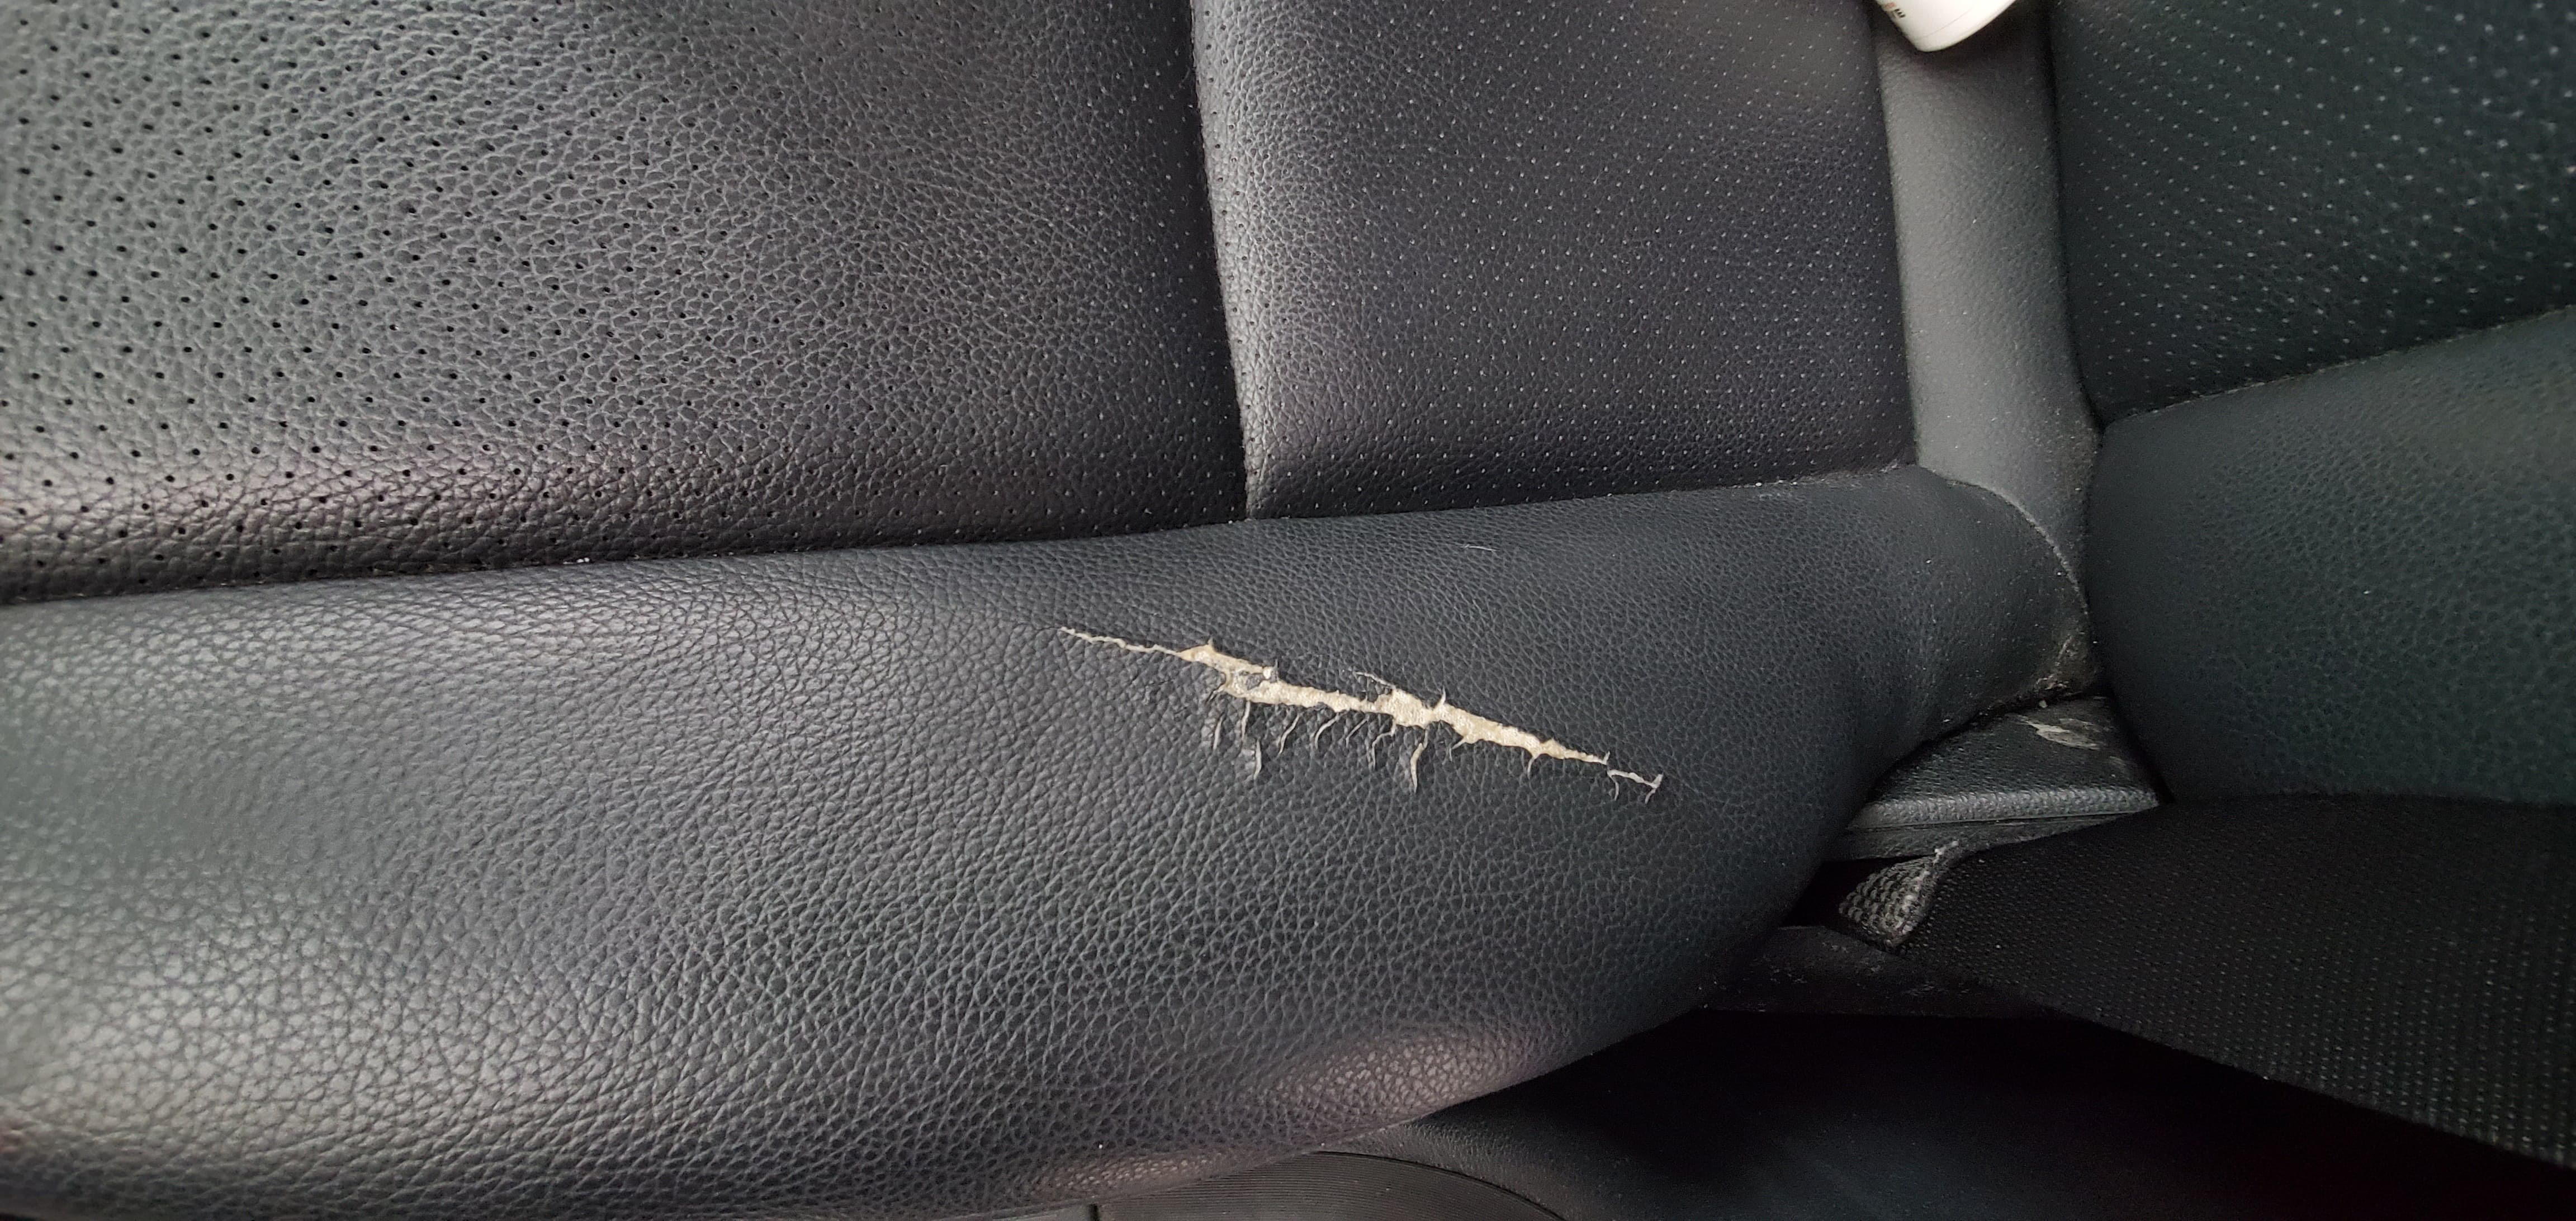 How To Repair A Leather Car Seat - How To Repair Rip In Leather Seat